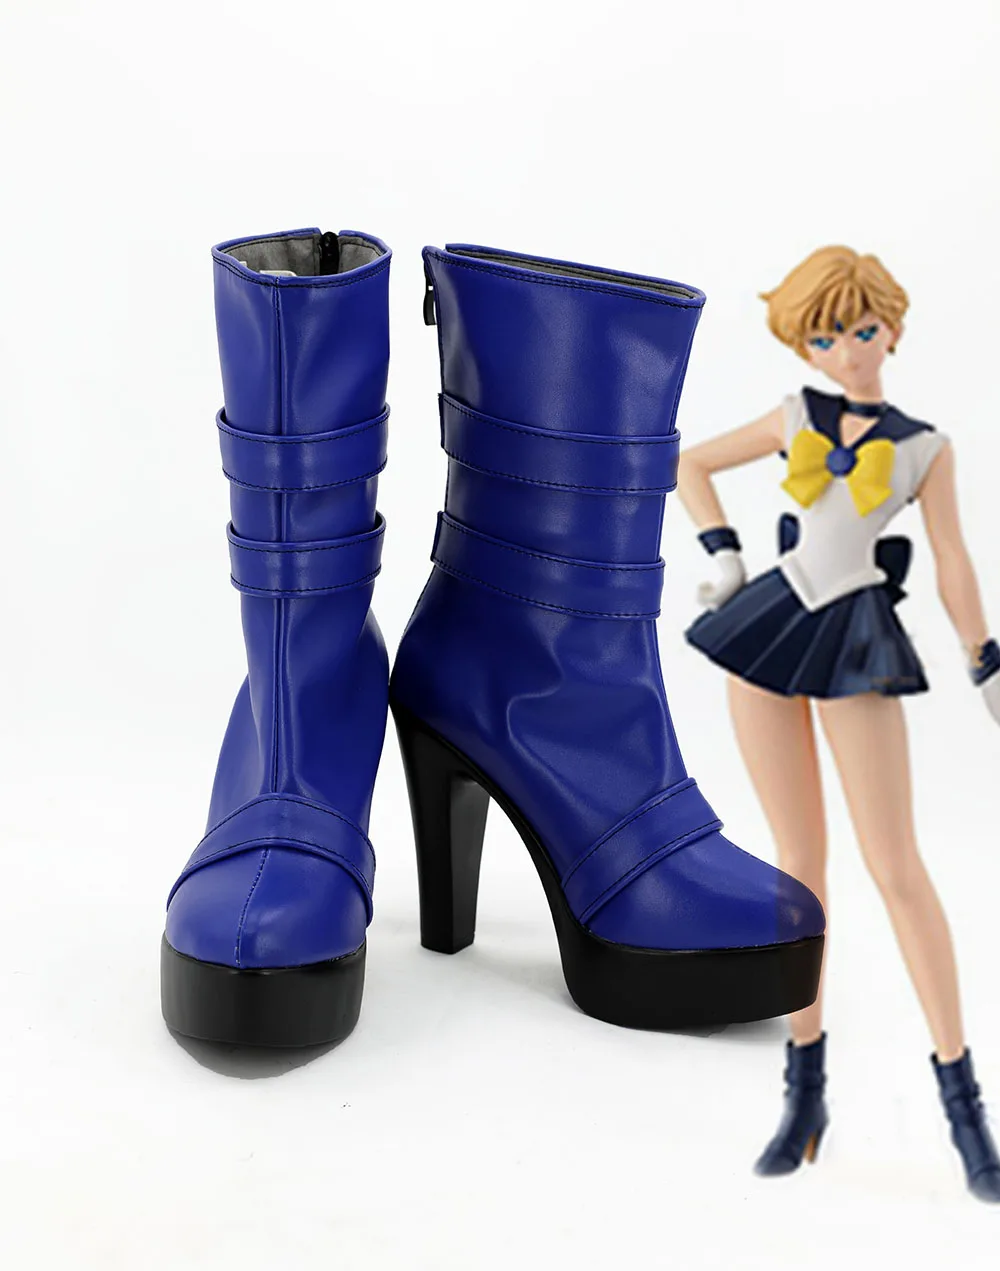 Just SHOES Accessories Hand-made Sailor Moon Amara Uranus Cosplay BOOTS Shoes 